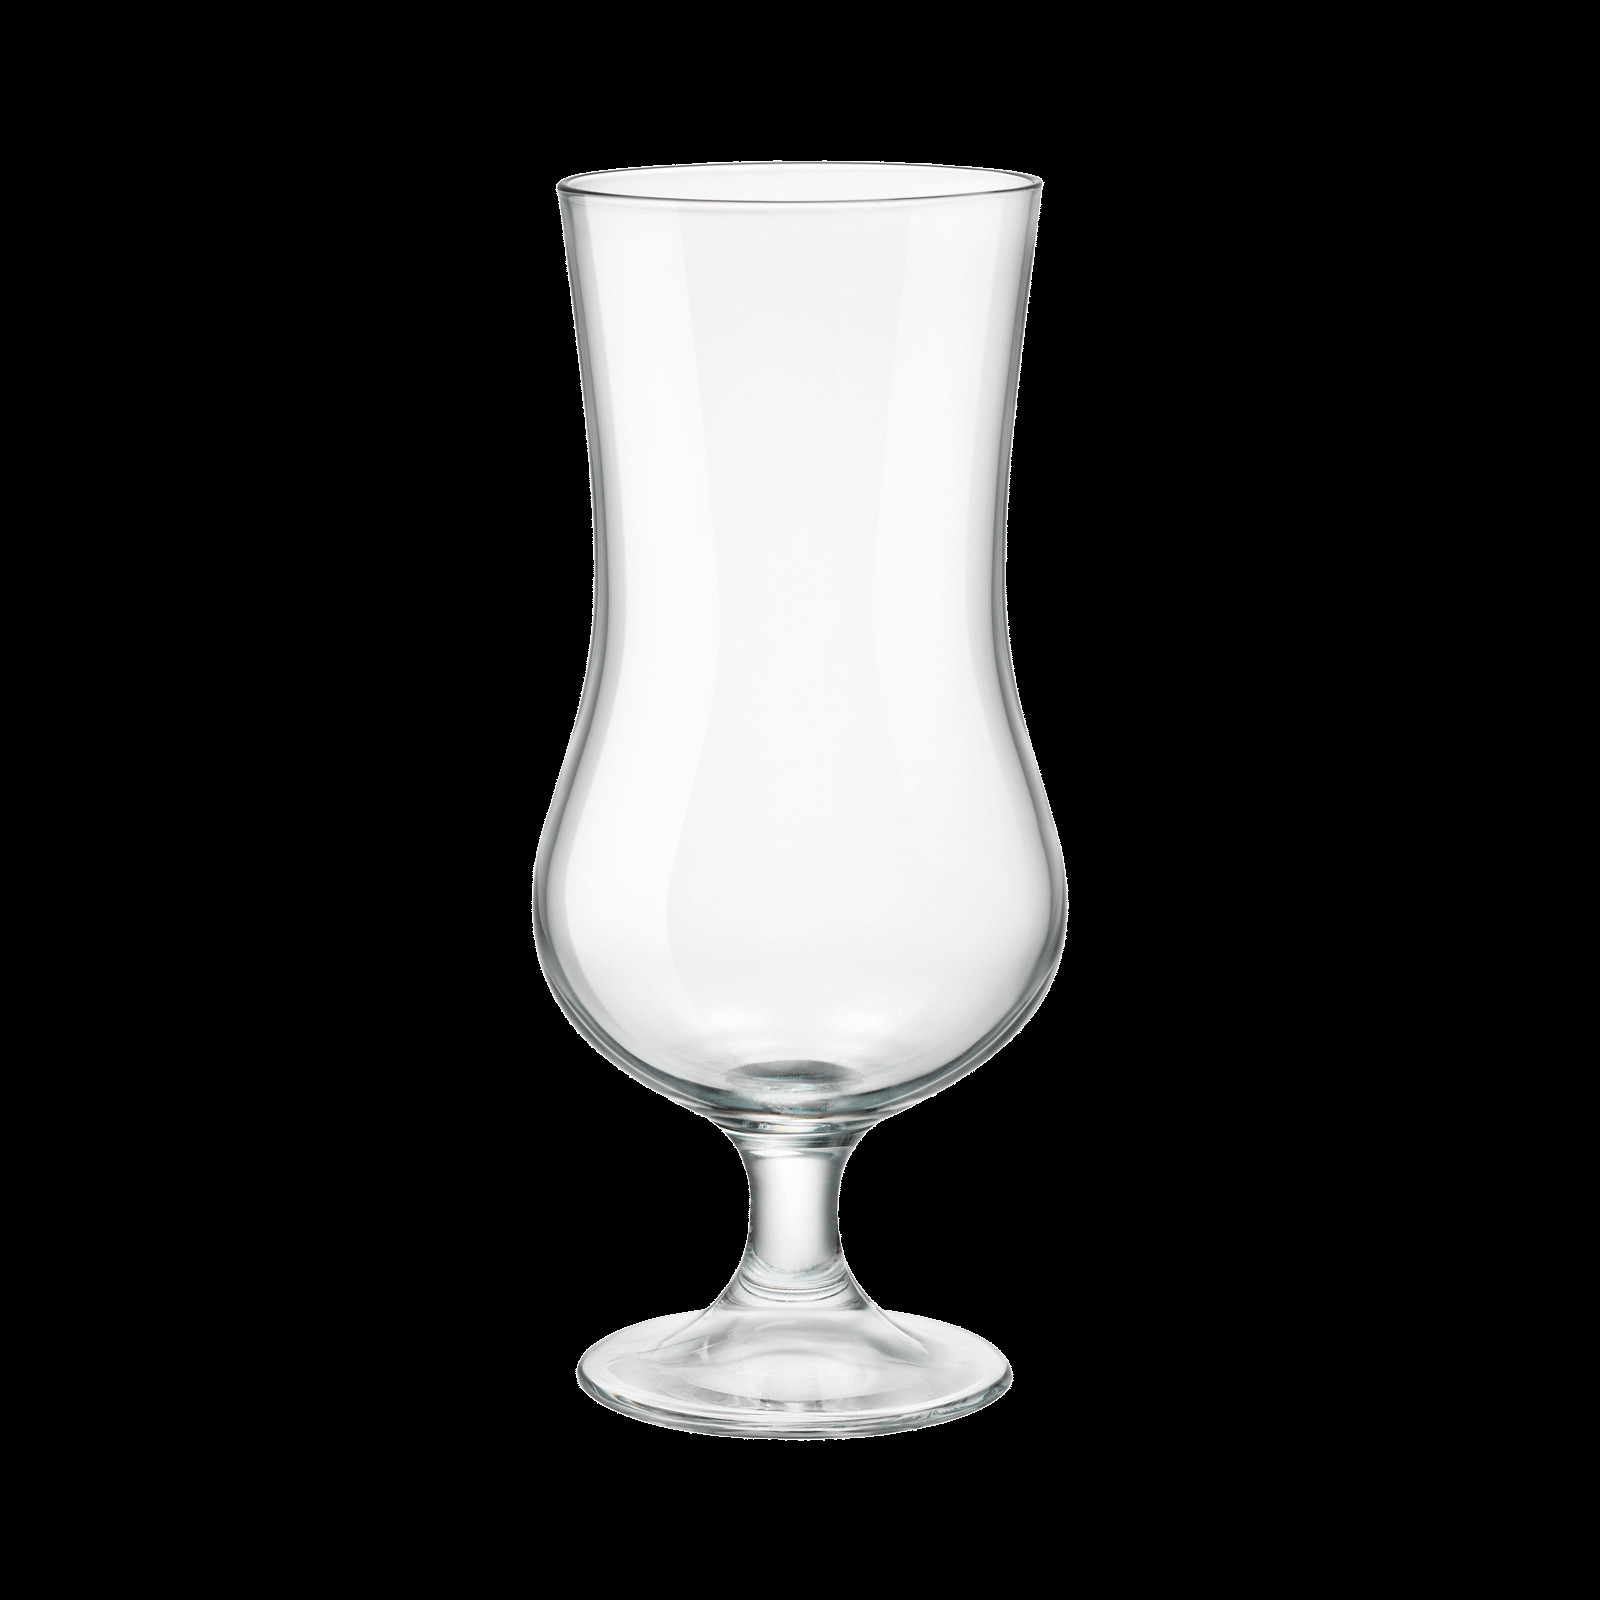 24 Recommended Extra Large Brandy Glass Vase 2024 free download extra large brandy glass vase of archivi products bormioli rocco with large beer glass